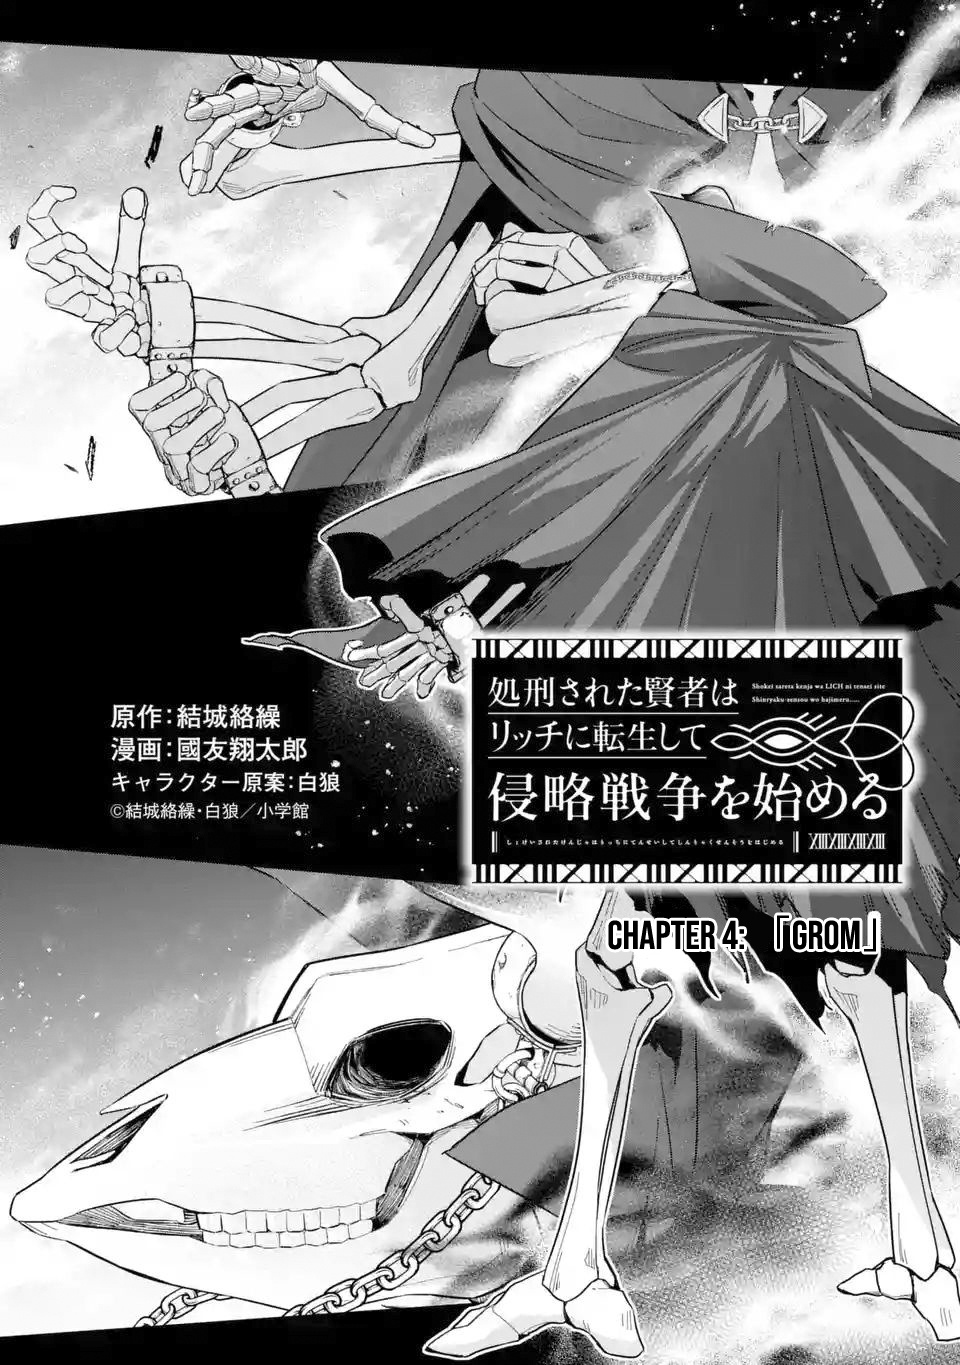 The Executed Sage Who Was Reincarnated As A Lich And Started An All-Out War Vol.1 Chapter 4.1: 「Grom」 - Picture 2